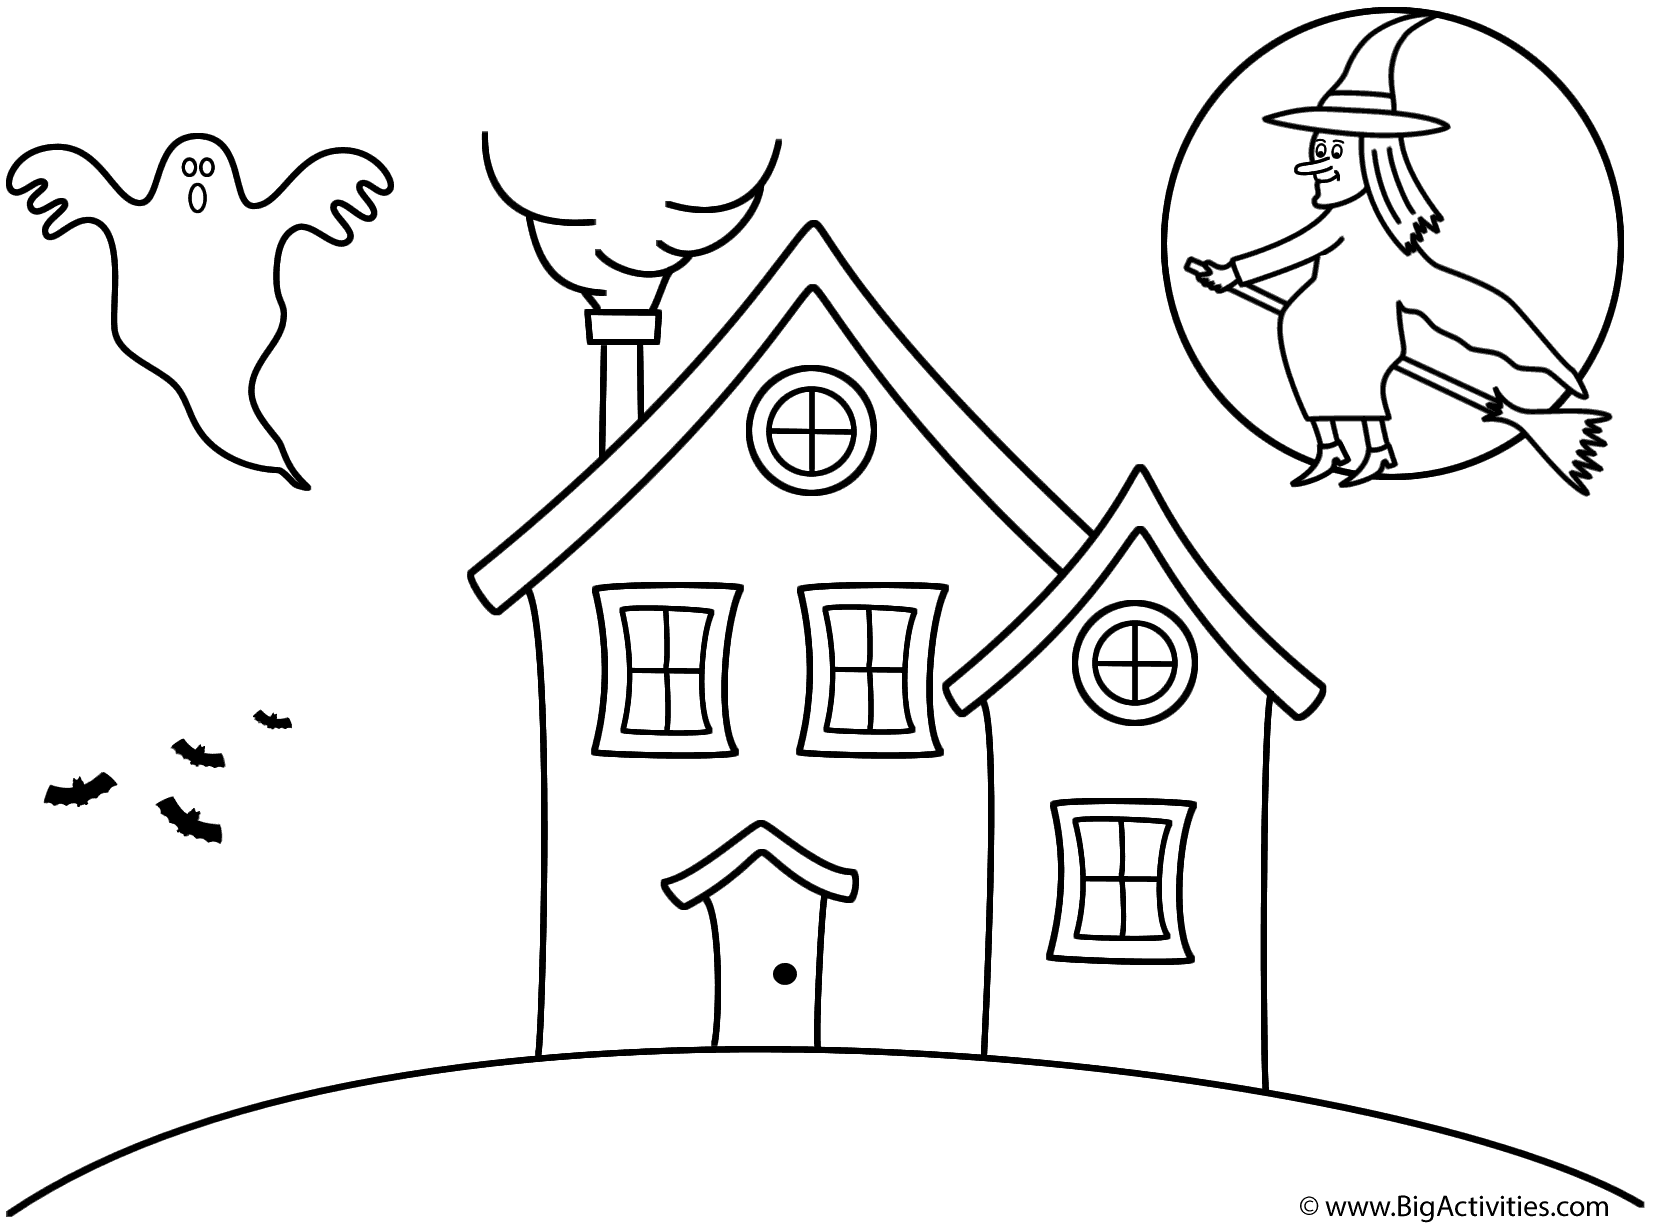 coloring page